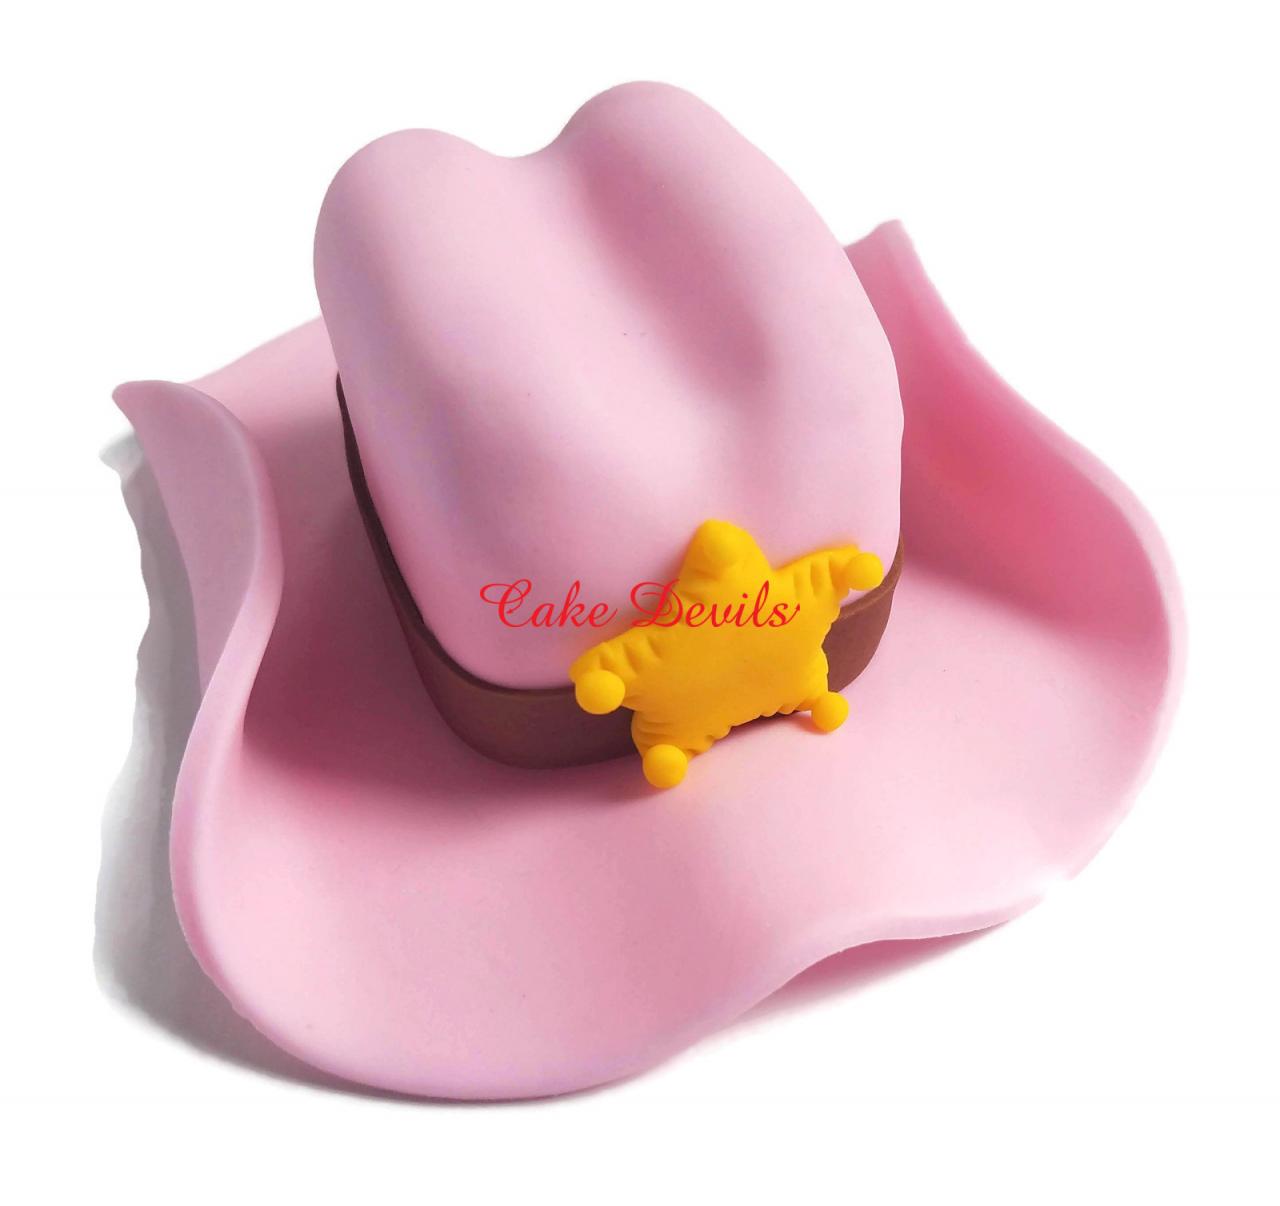 Fondant Cowgirl Hat Cake Topper, Handmade Edible Cowboy Hat, Country Western Cake Decorations